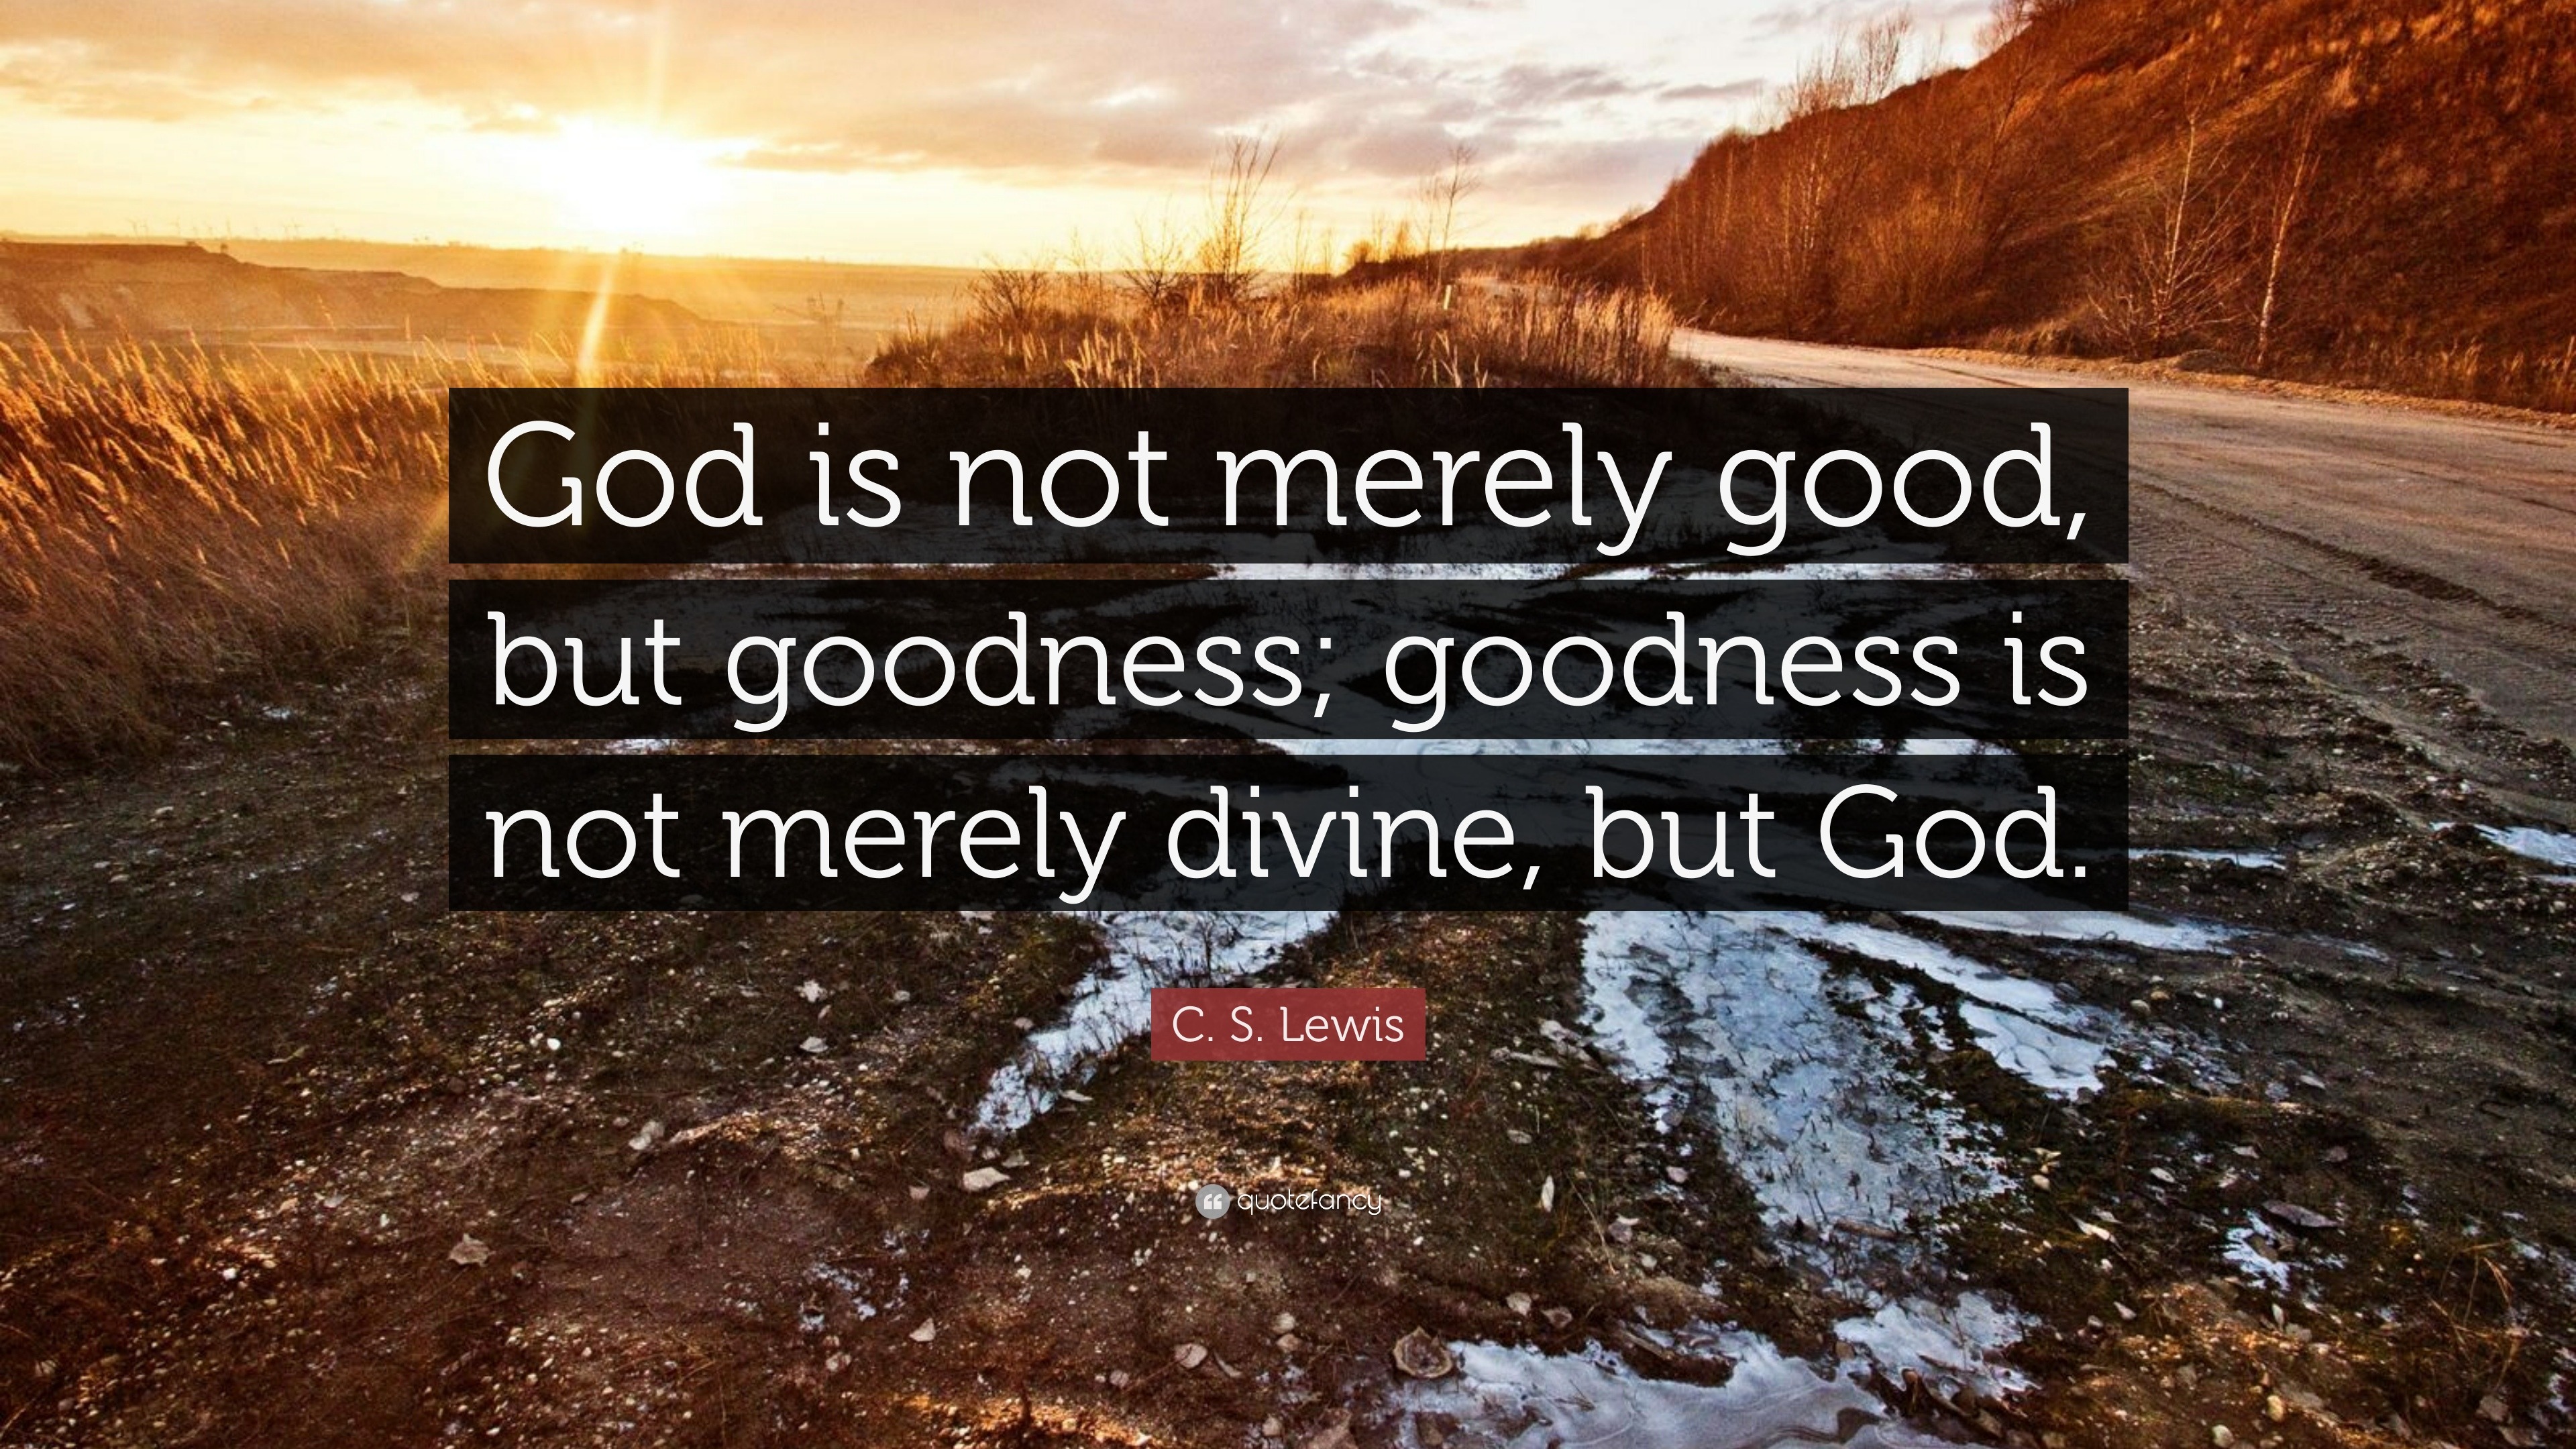 C. S. Lewis Quote: “God is not merely good, but goodness; goodness is